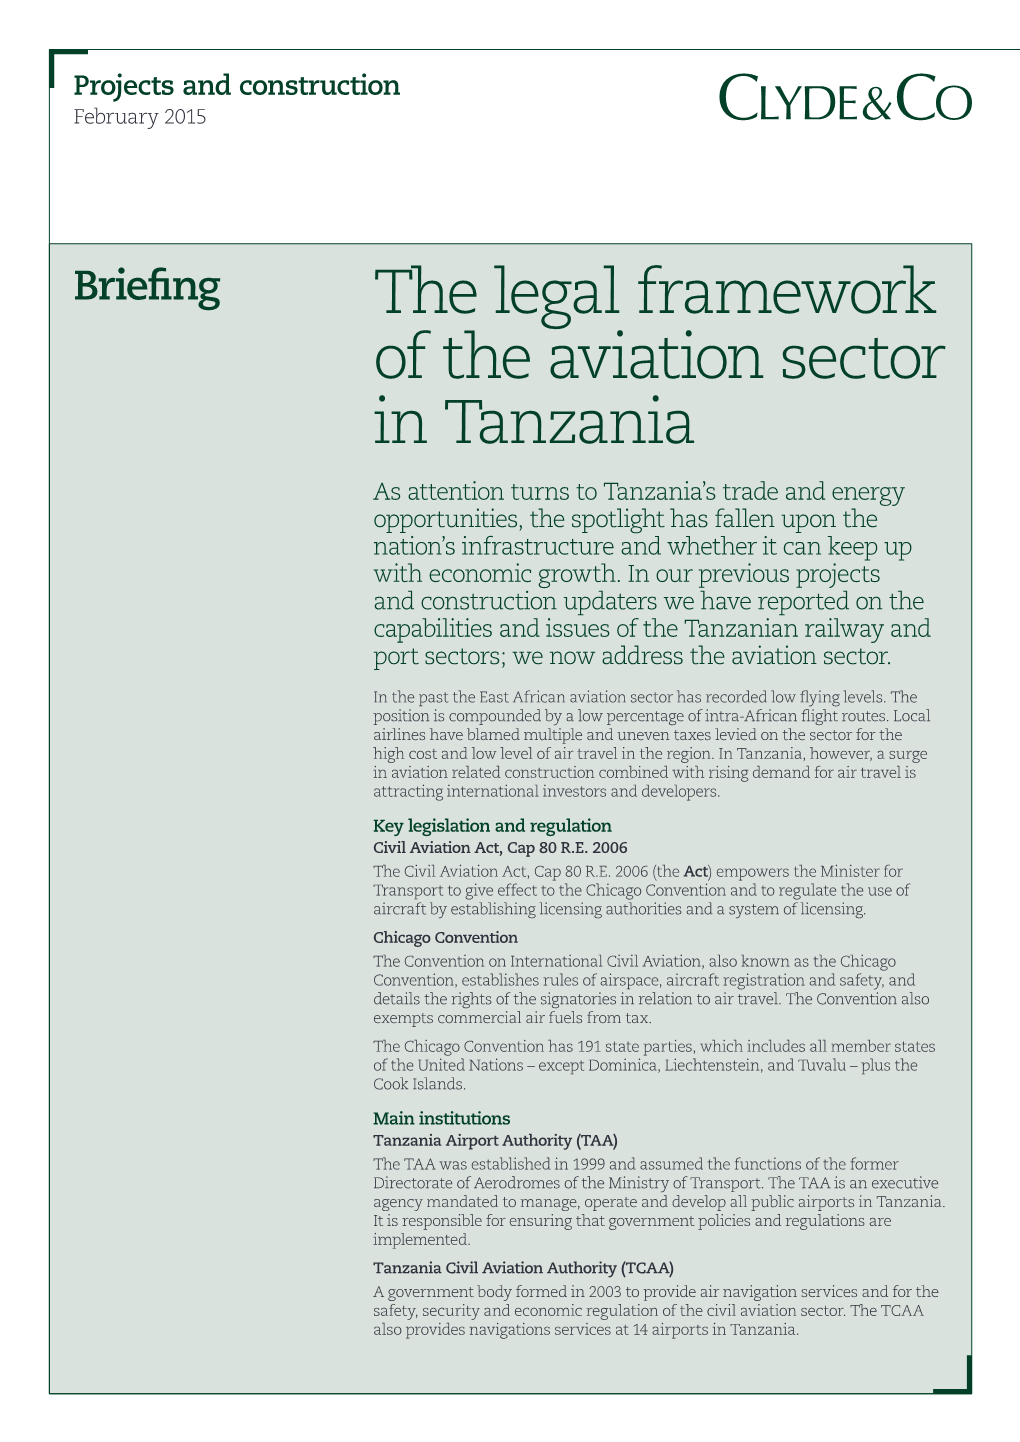 The Legal Framework of the Aviation Sector in Tanzania